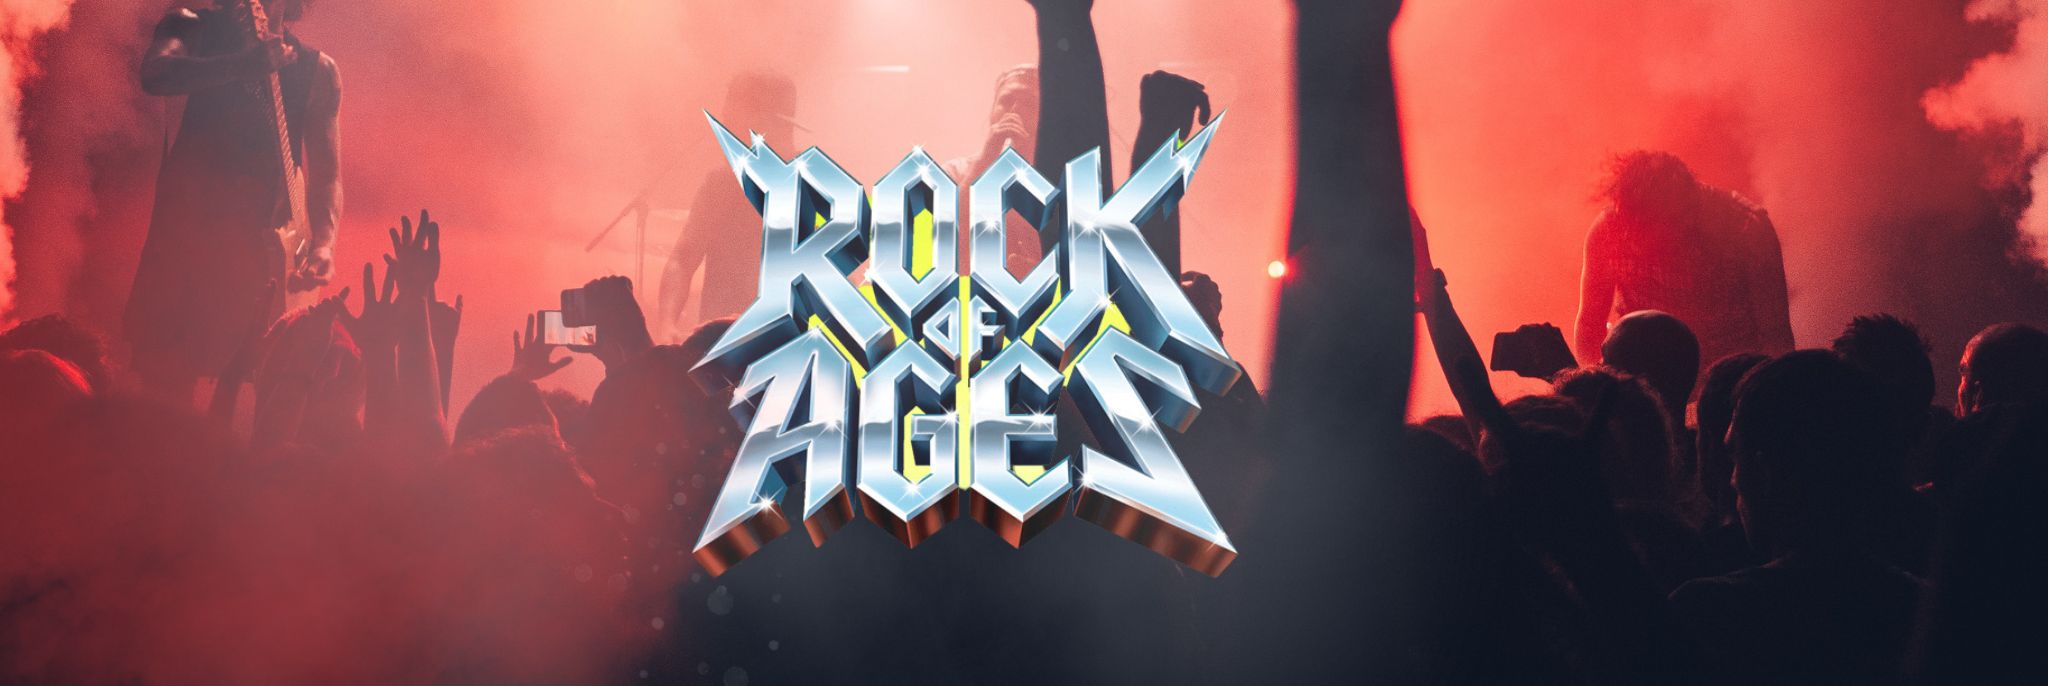 Freitag: Rock of Ages